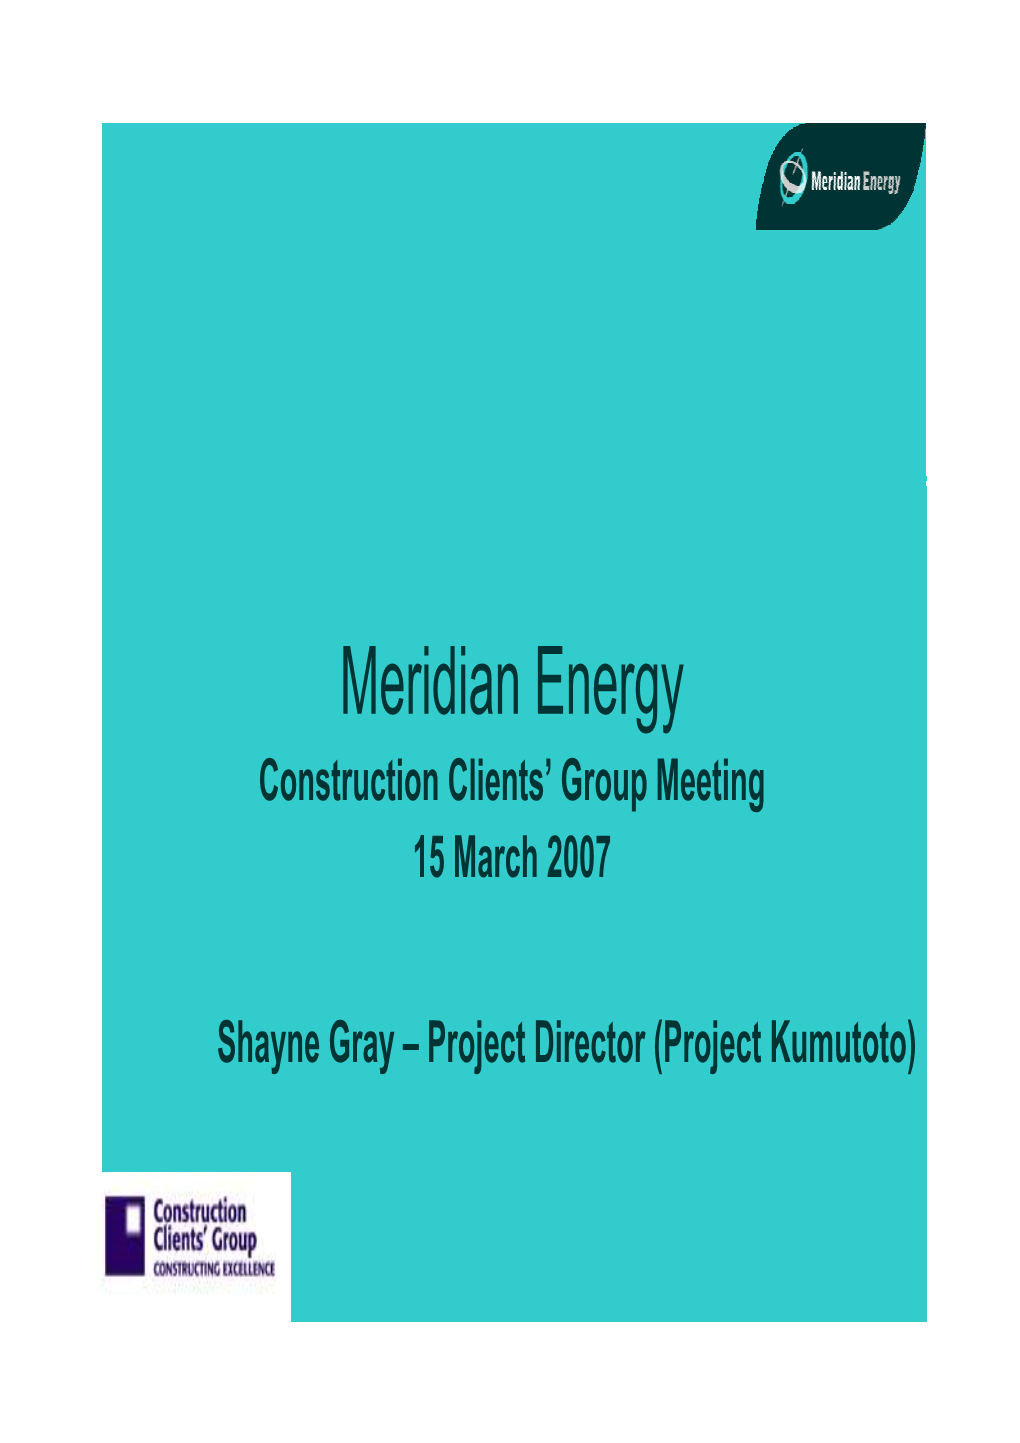 Meridian Energy Construction Clients’ Group Meeting 15 March 2007